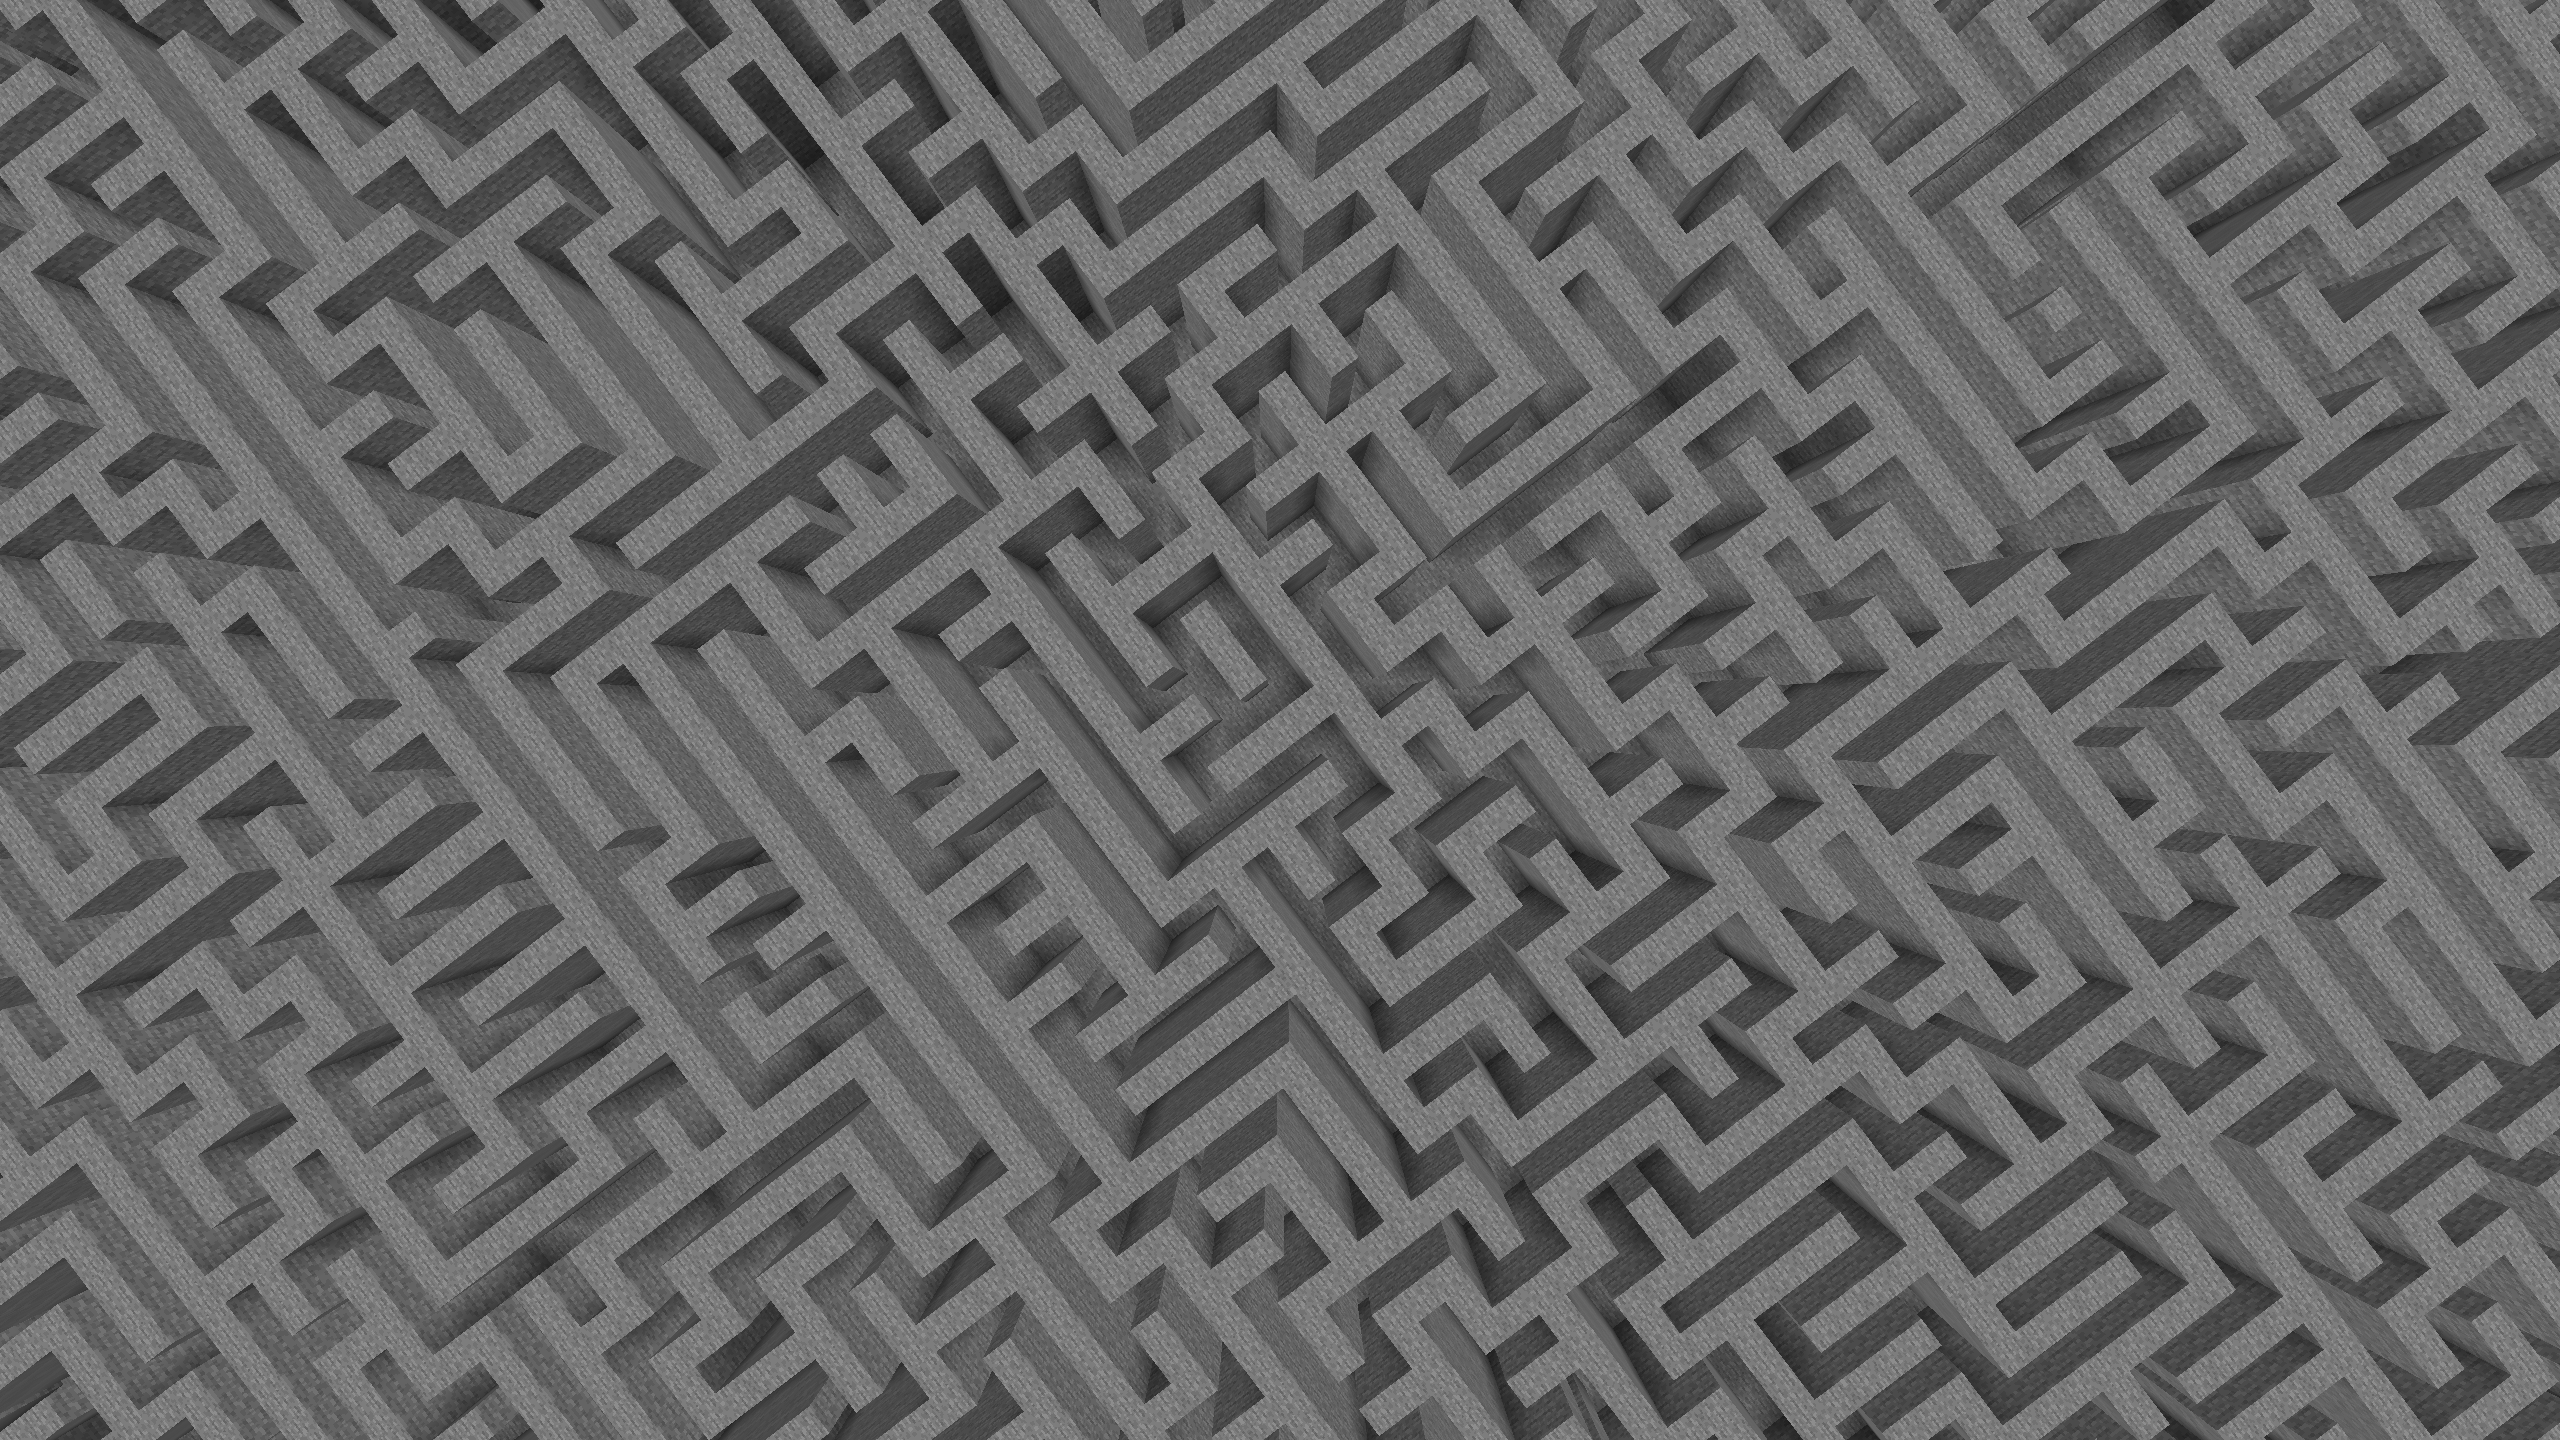 Huge maze from above